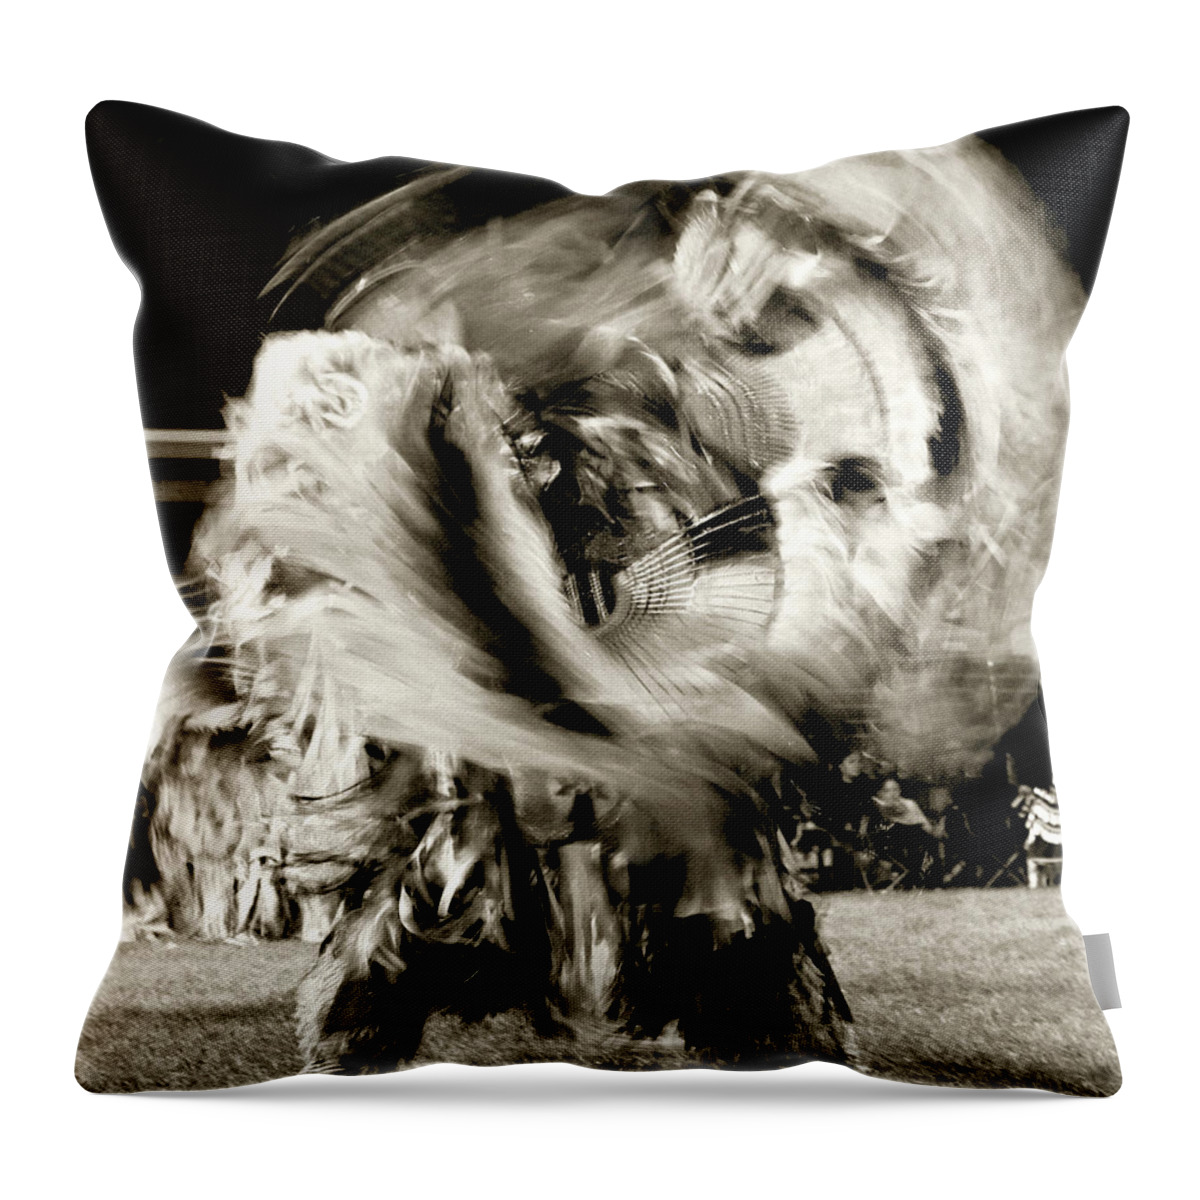 Fancy Dancer Throw Pillow featuring the photograph Pow Wow Dancer by Cynthia Dickinson